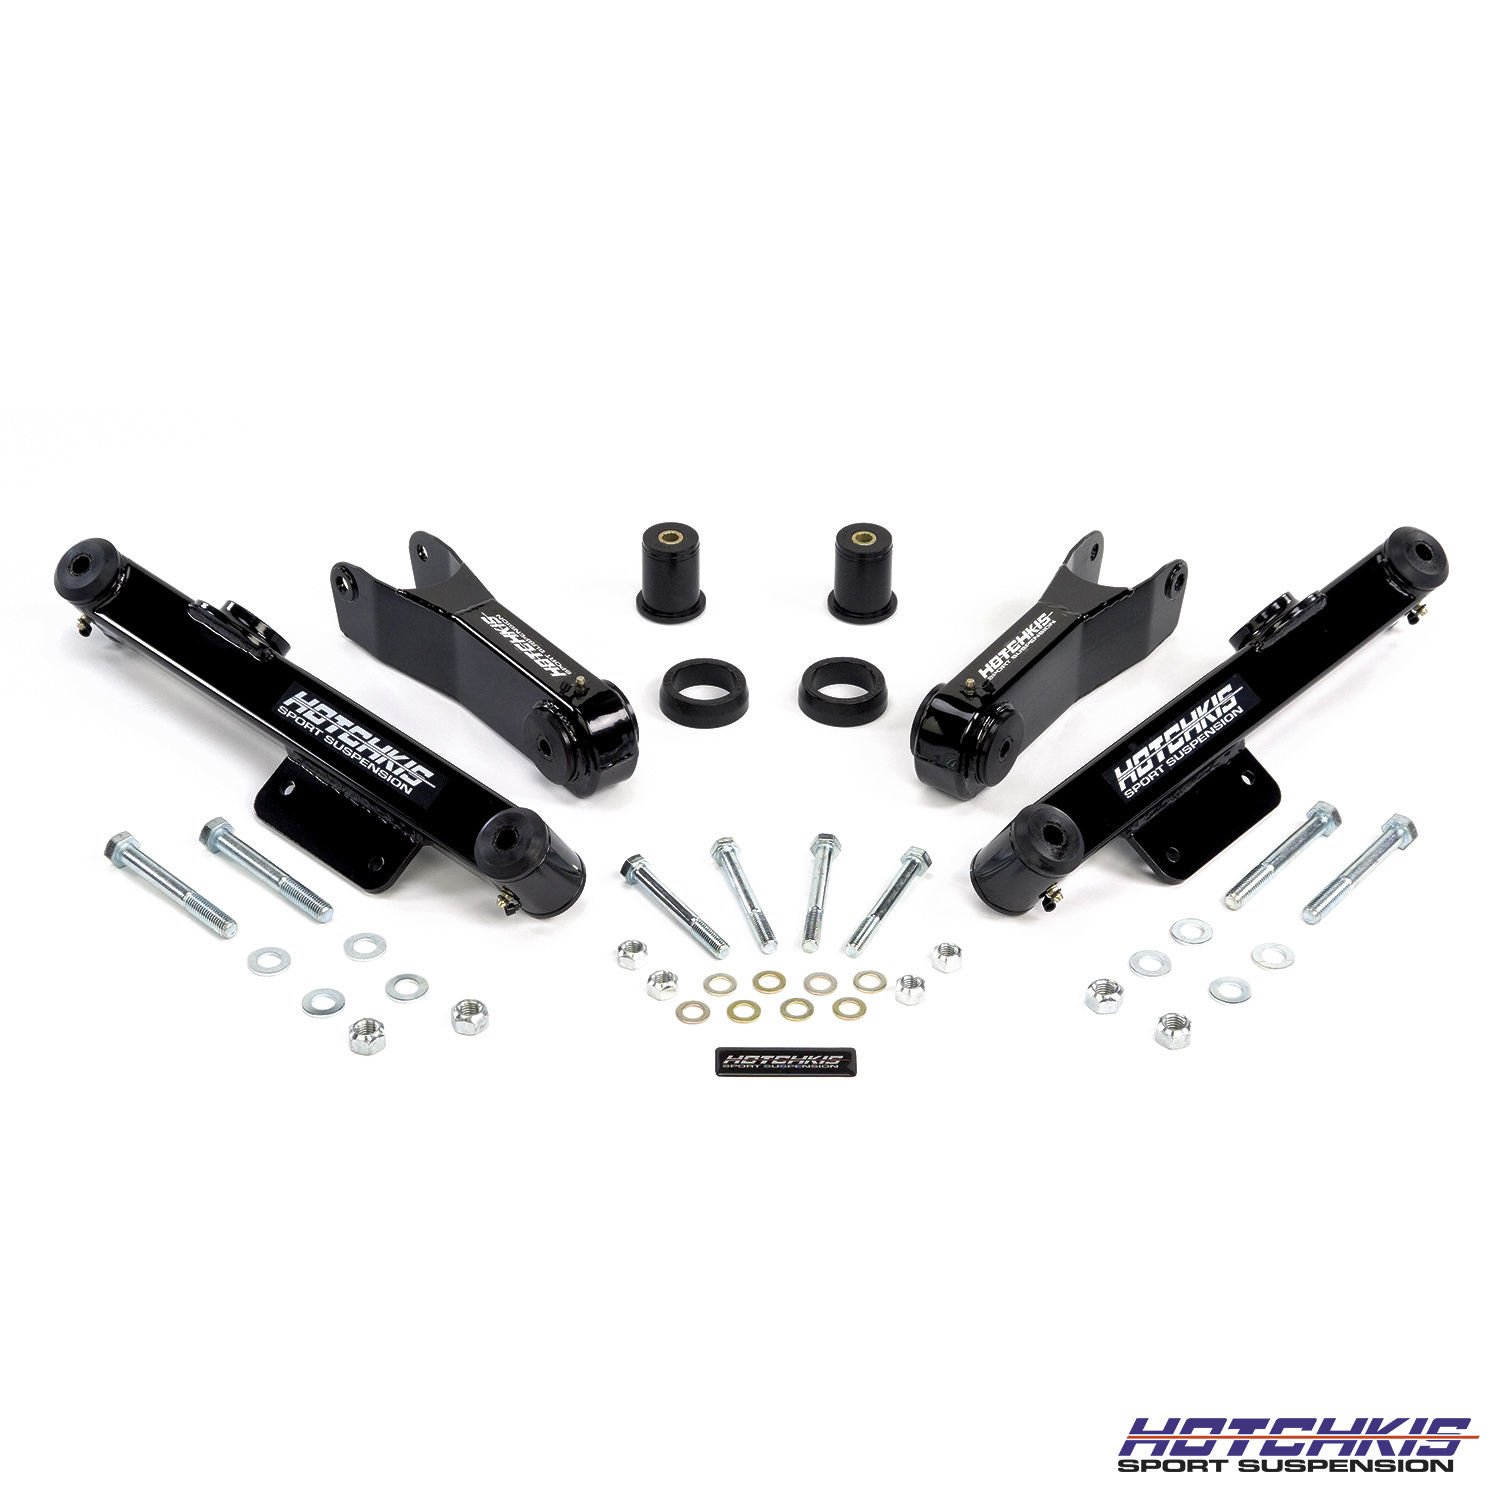 1979-98 Ford Mustang Hotchkis Suspension Rear Suspension Package - Black